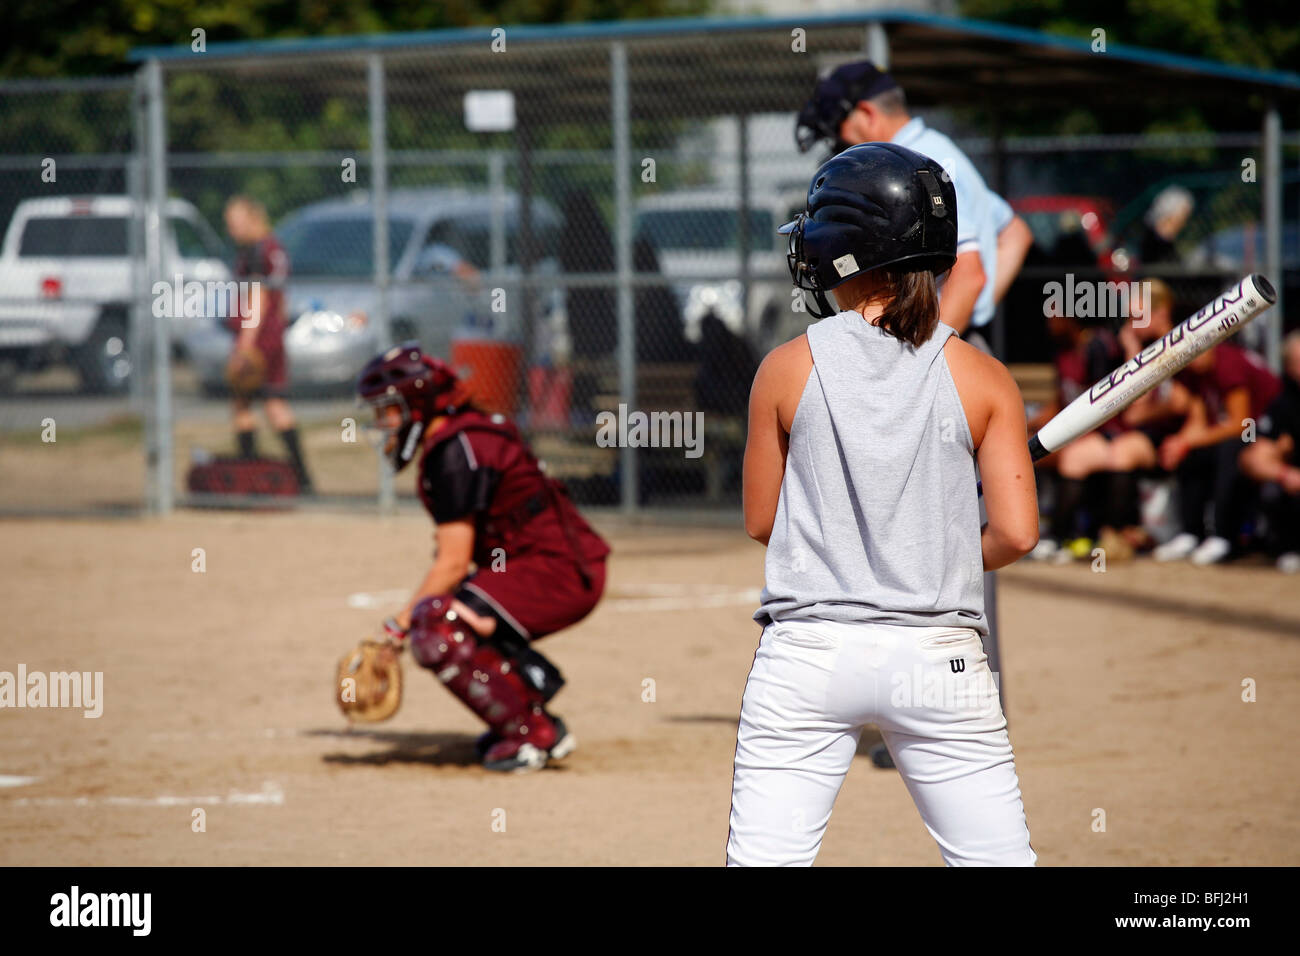 North Idaho College softball game, Sept. 28, 2008, Coeur D Alene, Idaho. Batter waiting on deck, getting ready to hit. Stock Photo